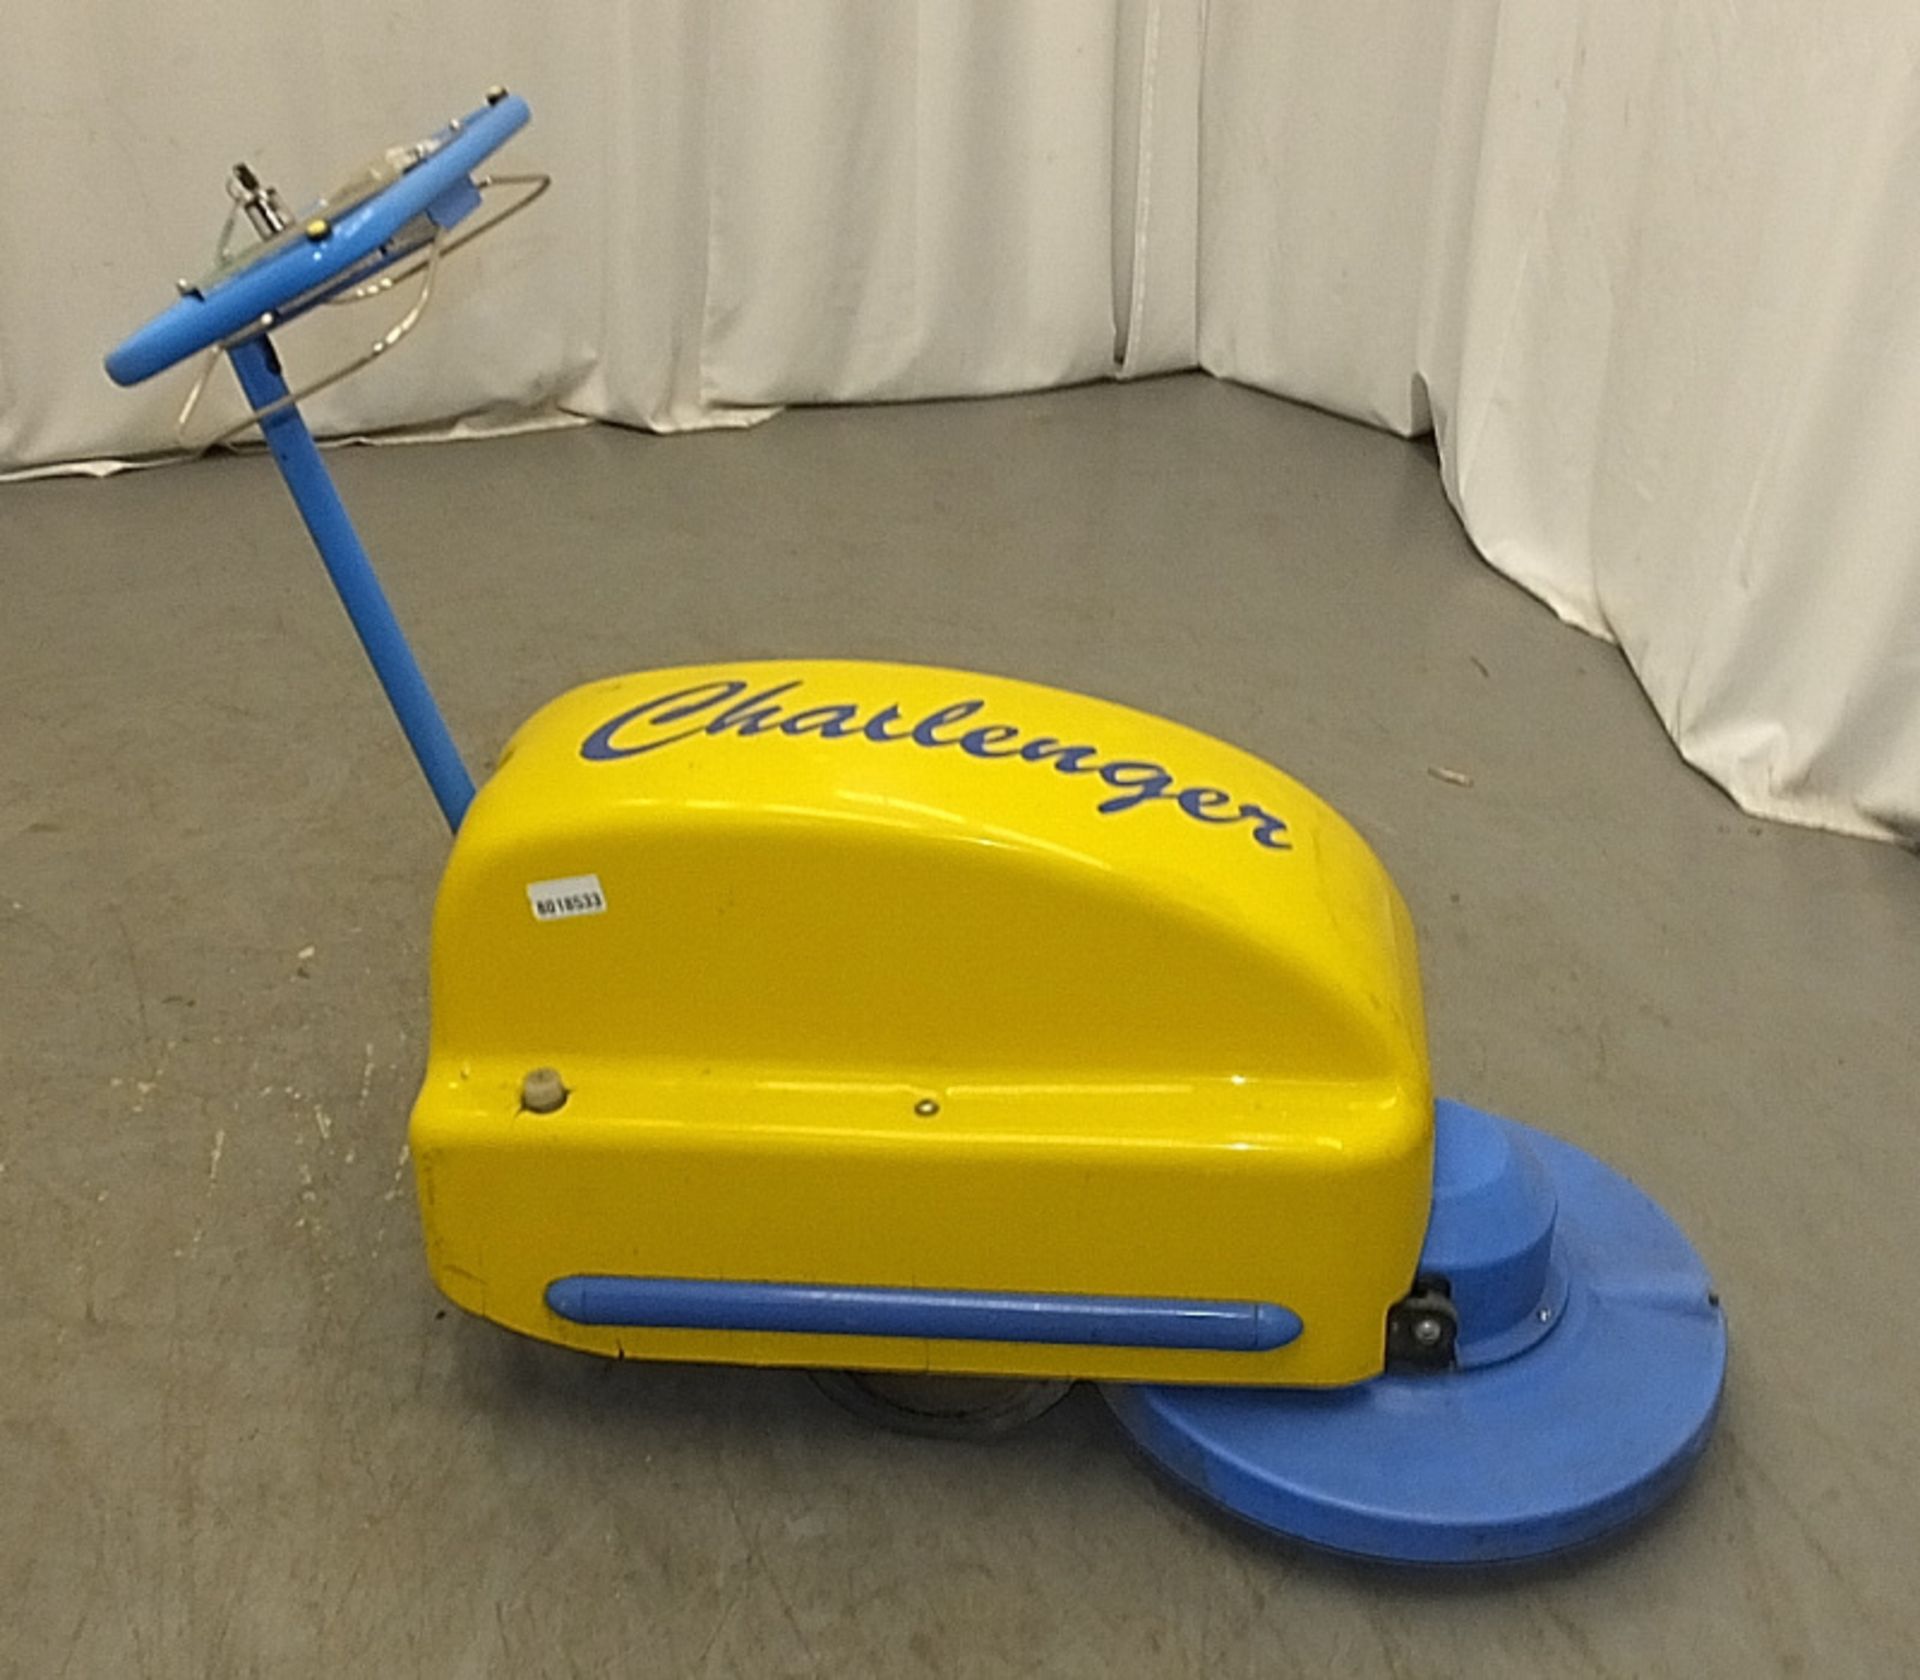 Tennant Challenger Nippy 500 Walk-Behind Floor Cleaner - has key but doesn't power up